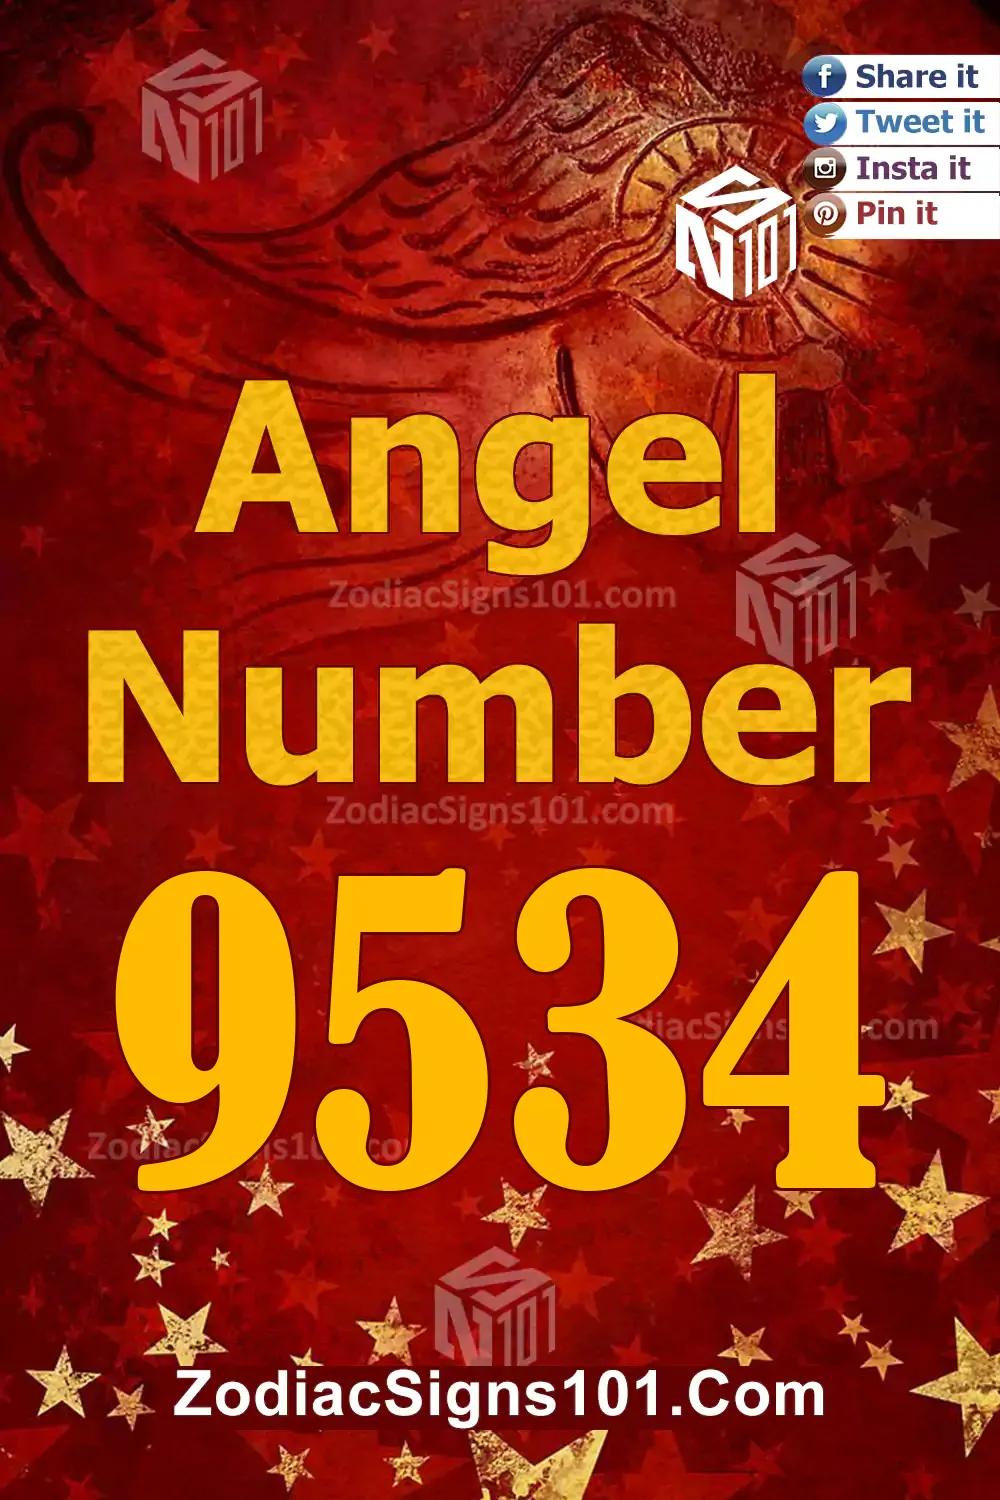 9534 Angel Number Meaning